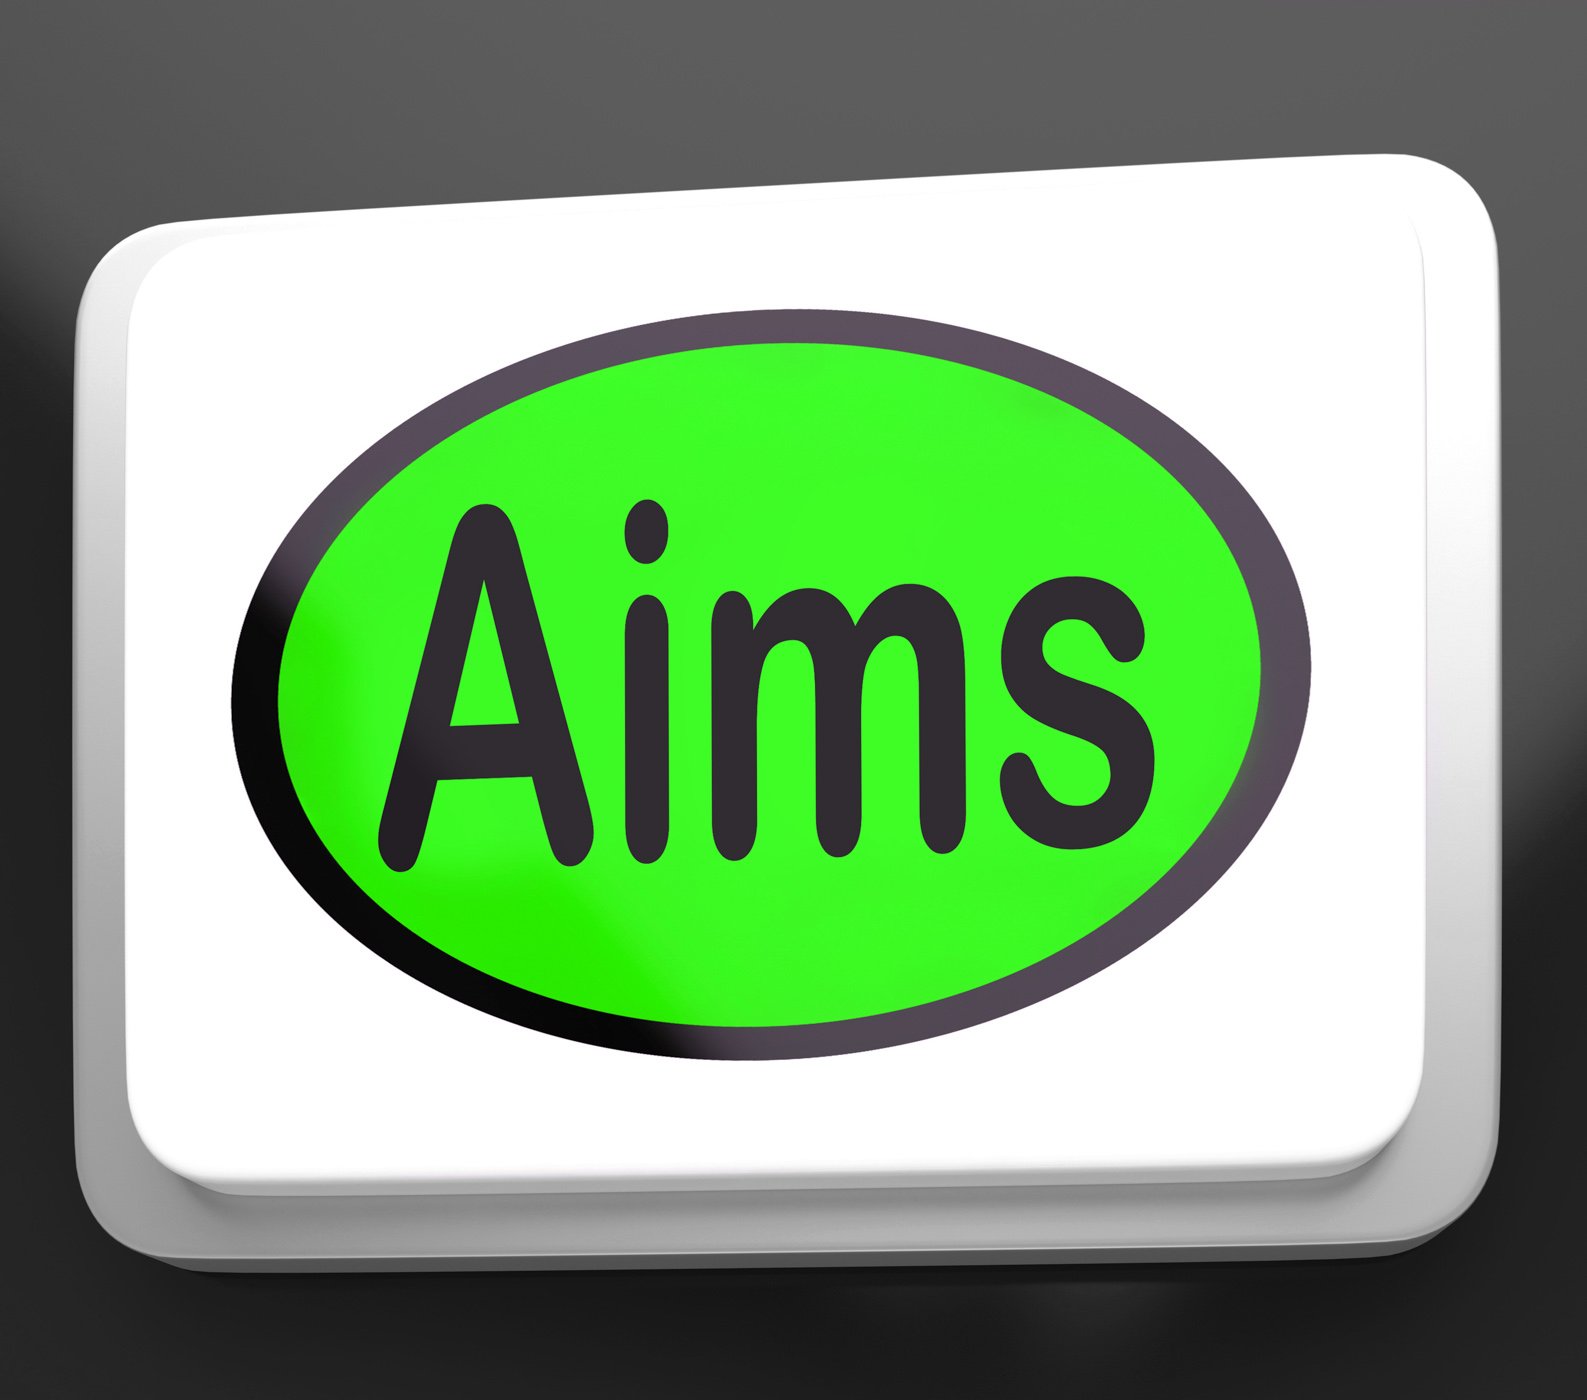 Aims Button Shows Targeting Purpose And Aspiration, Aim, Aiming, Aims, Ambition, HQ Photo